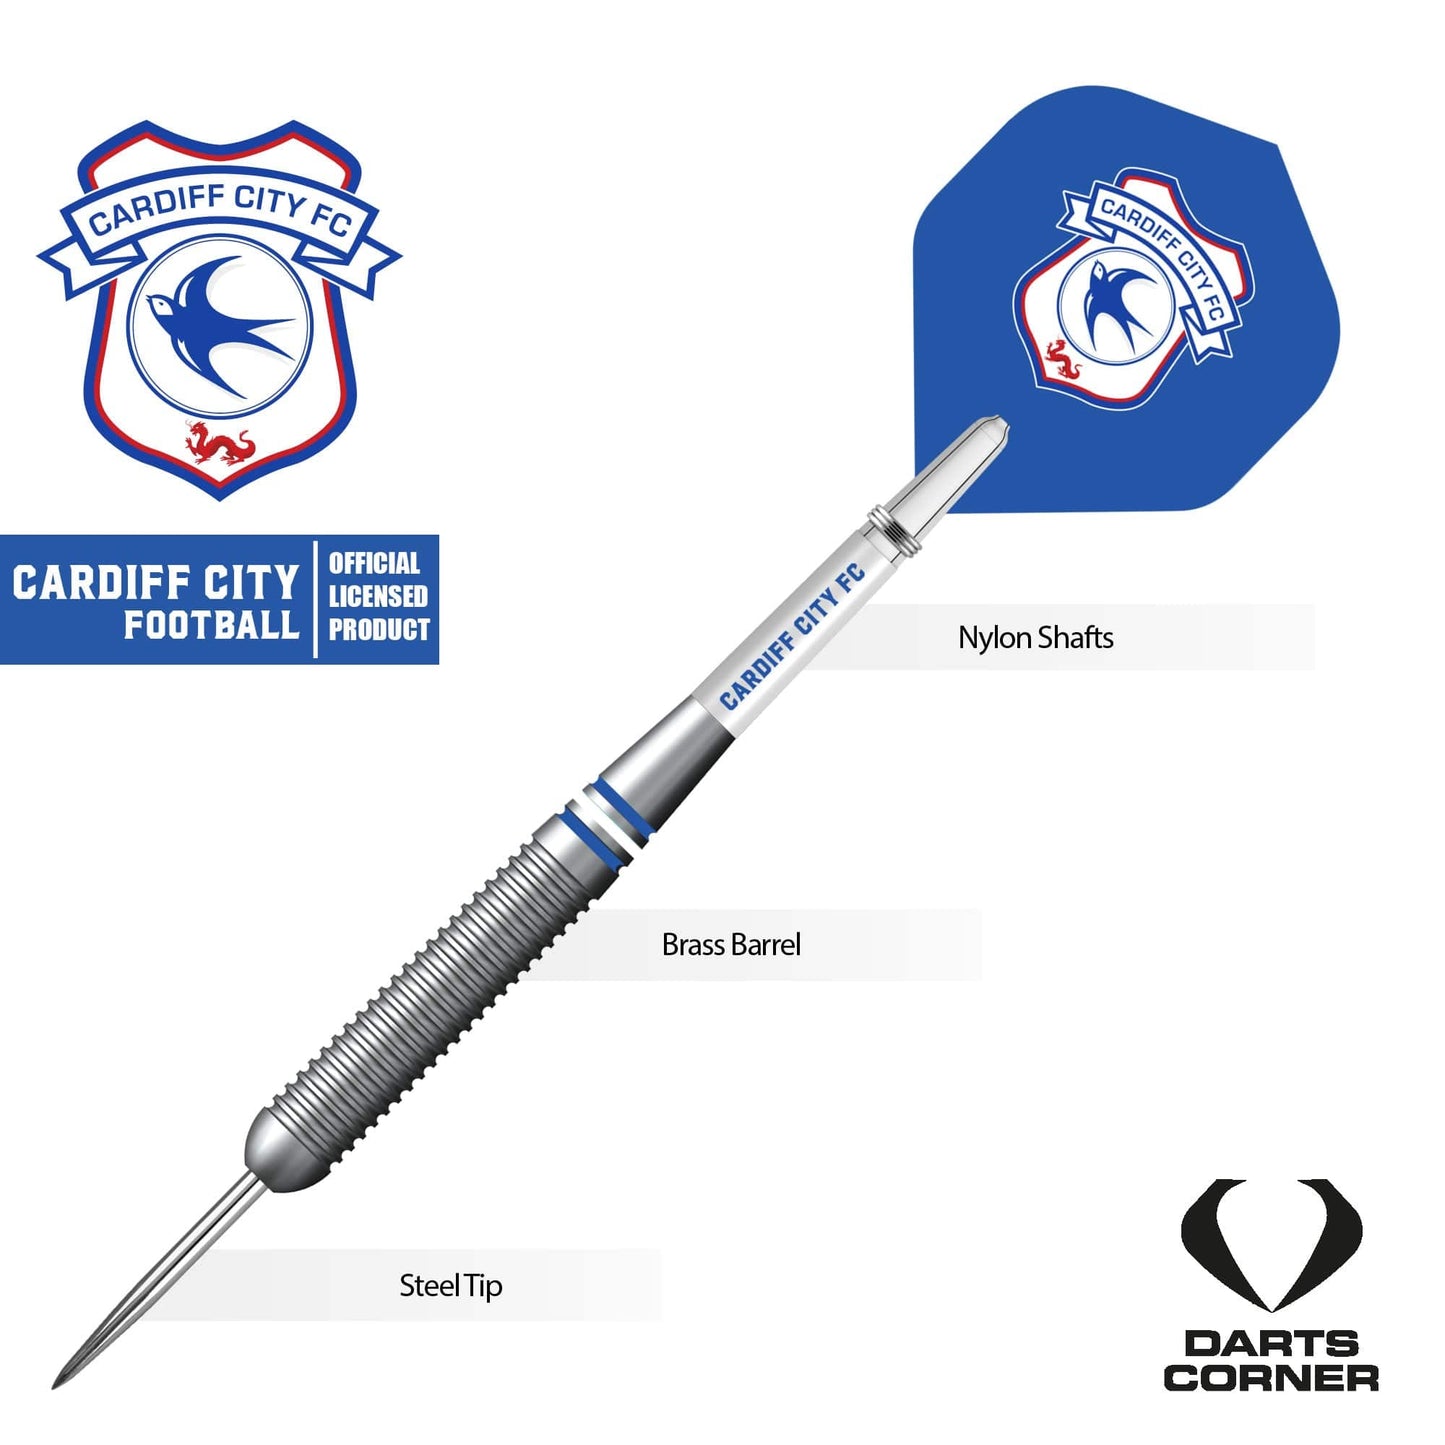 Cardiff City FC - Official Licensed - Steel Tip Darts - Brass - 22g 22g